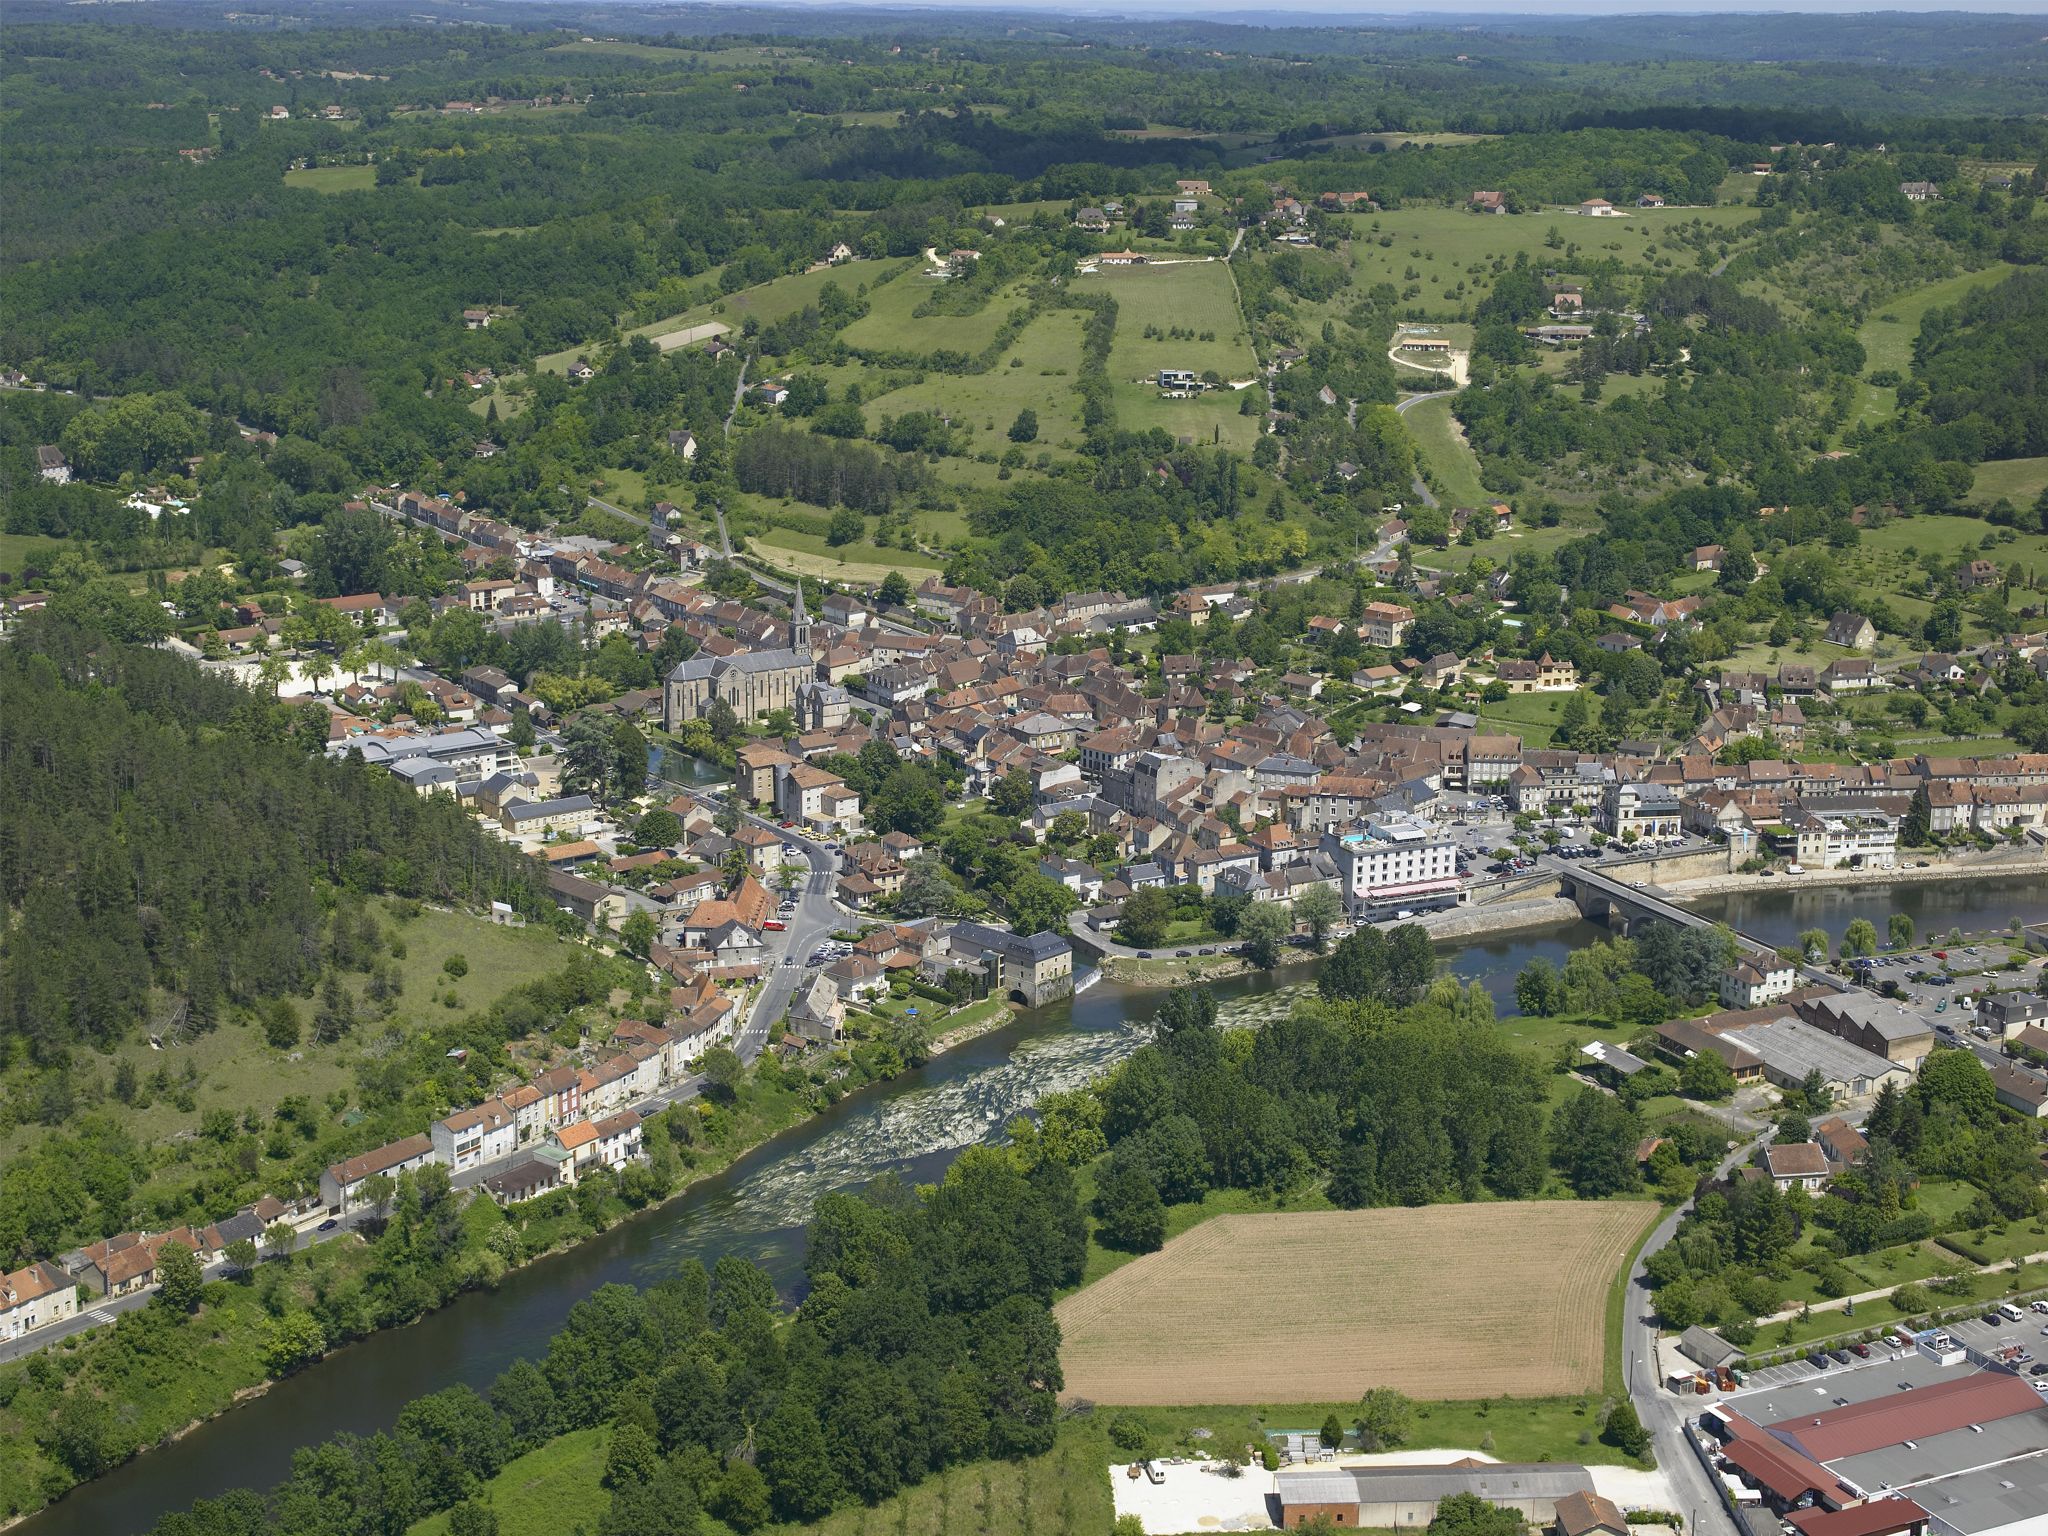 The Ladouch flows into the Vézère at Le Bugue, aerial view